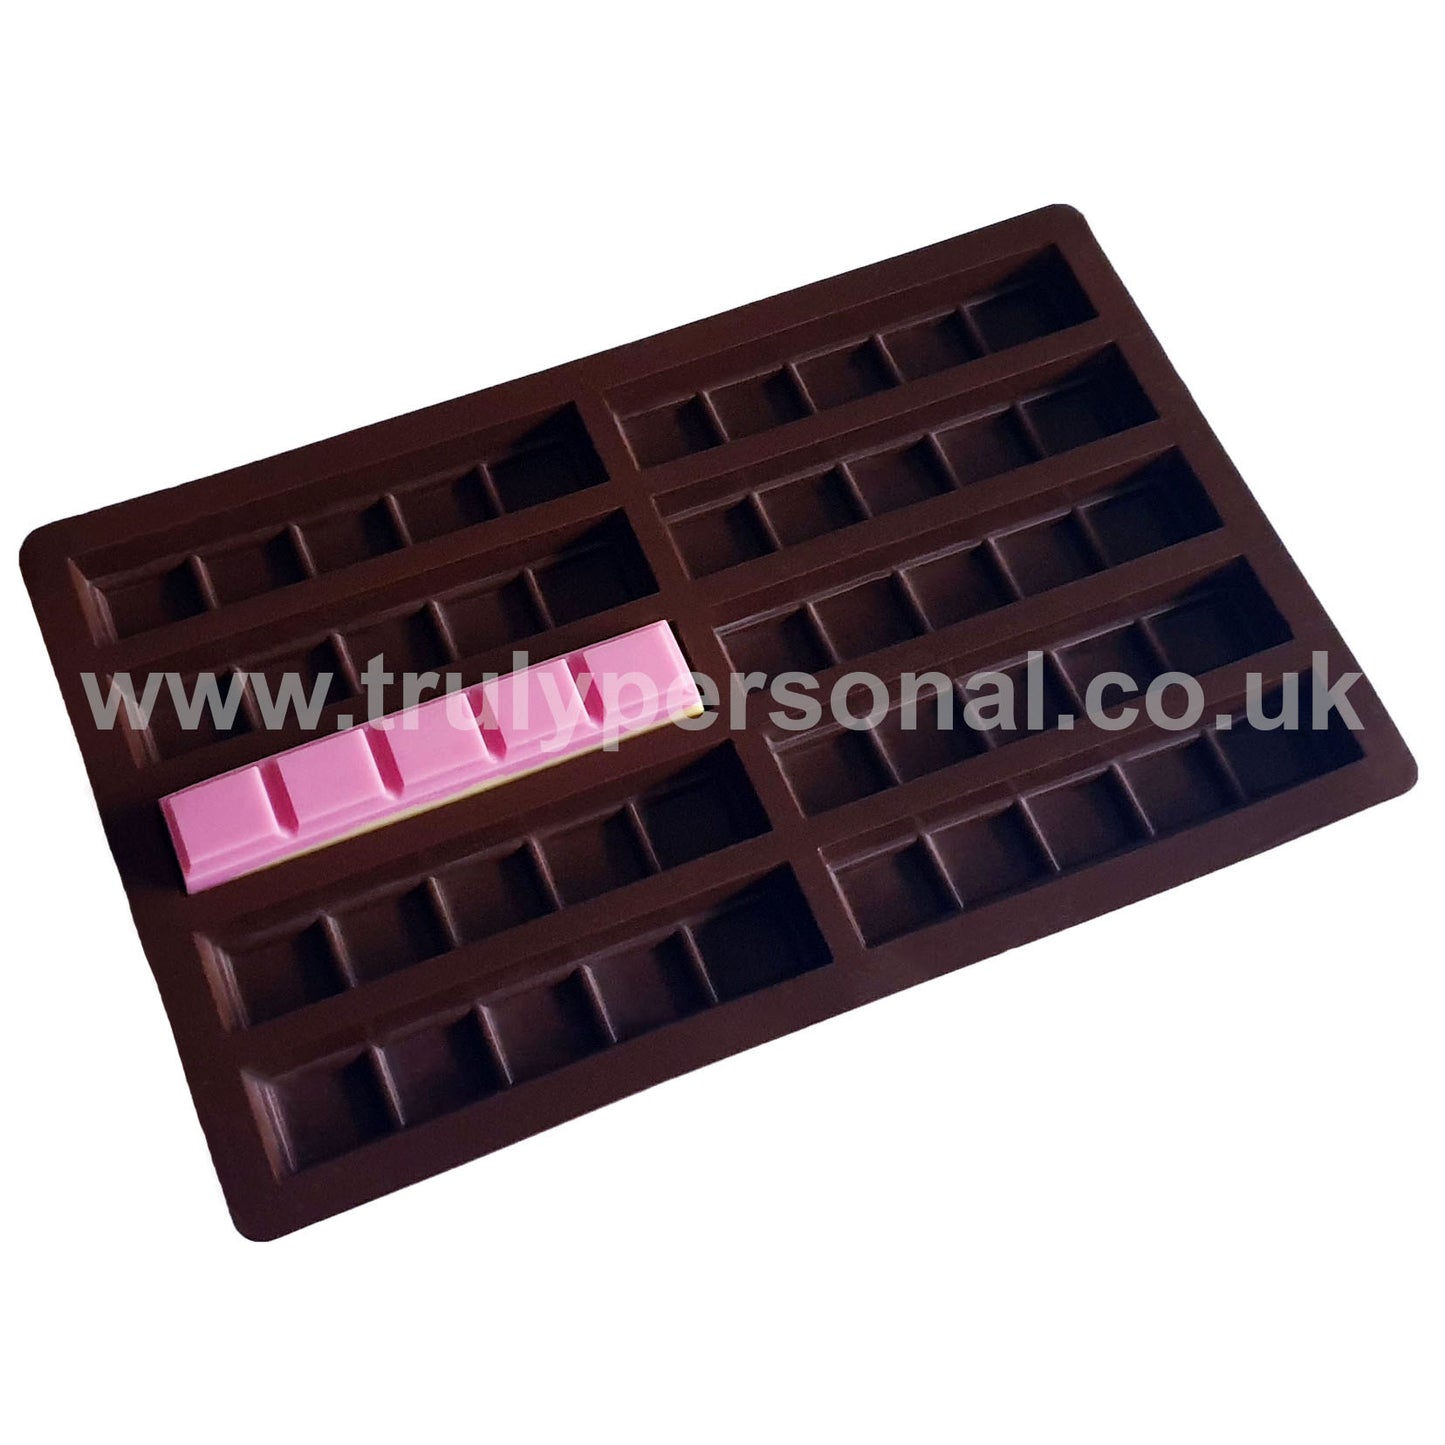 Snap Bar Silicone Mould - 10 x 5 | Wax Melts | Truly Personal Ltd